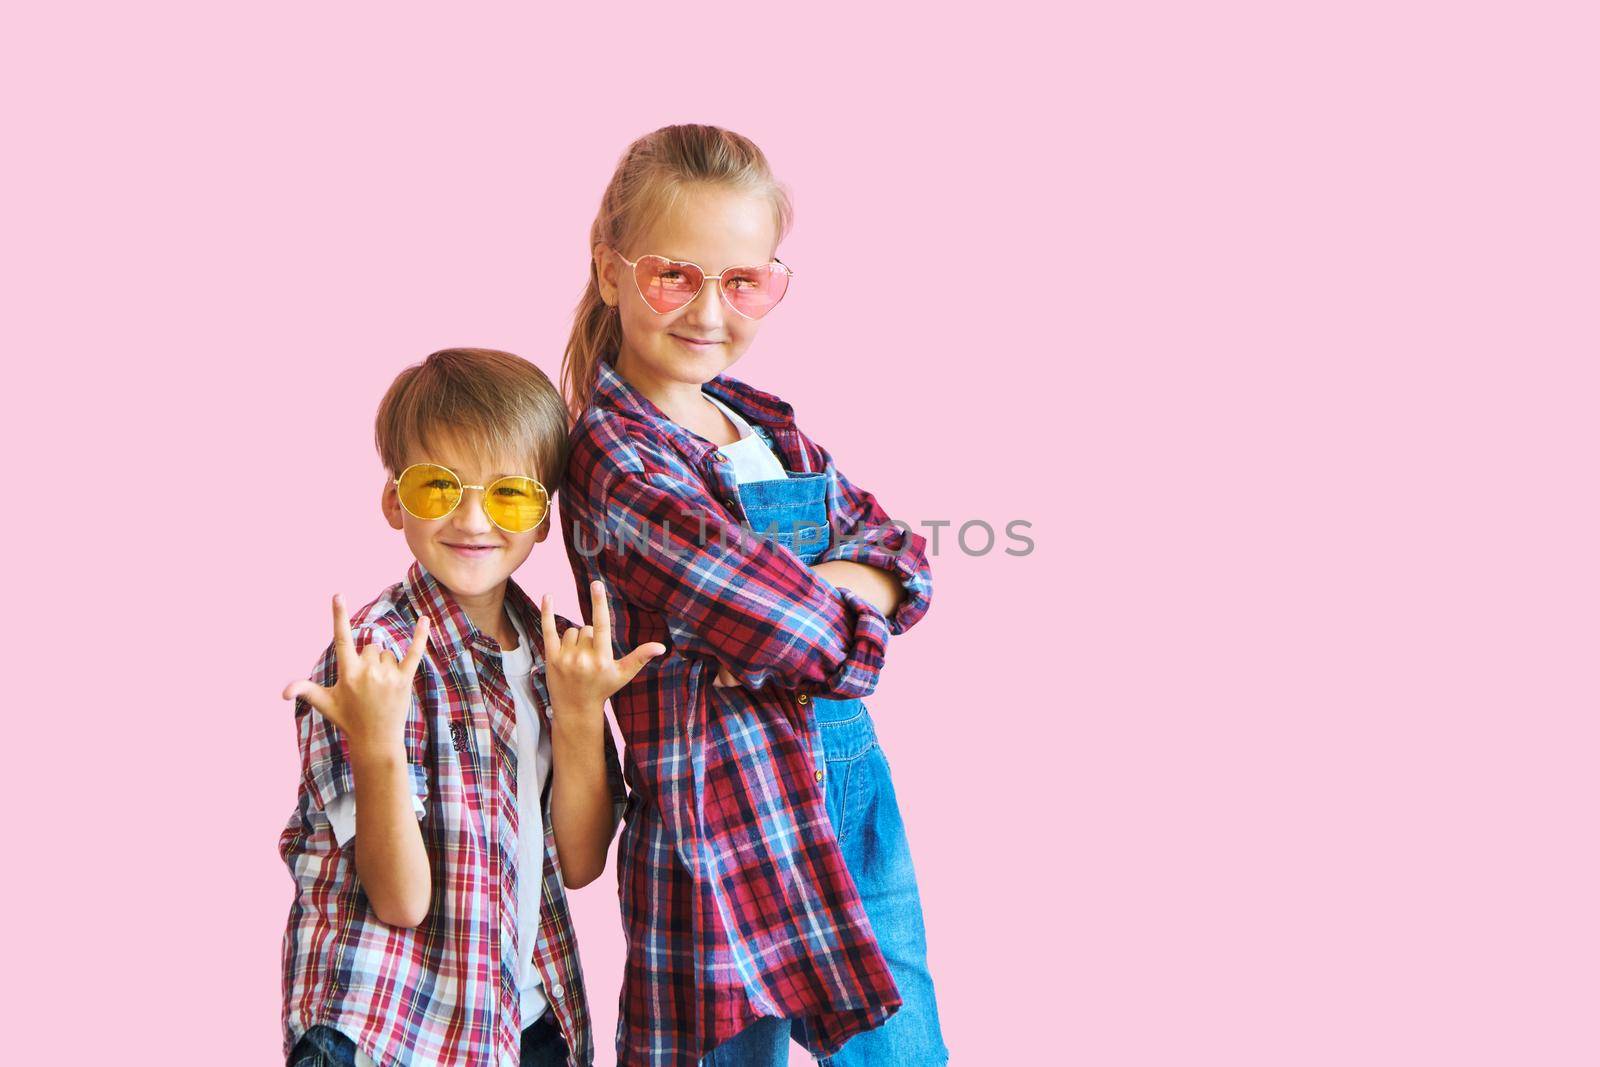 Cute stylish little girl and boy in color sunglasses dressed in plaid shirts, looking at camera and laughing while standing on pink background with copy space.